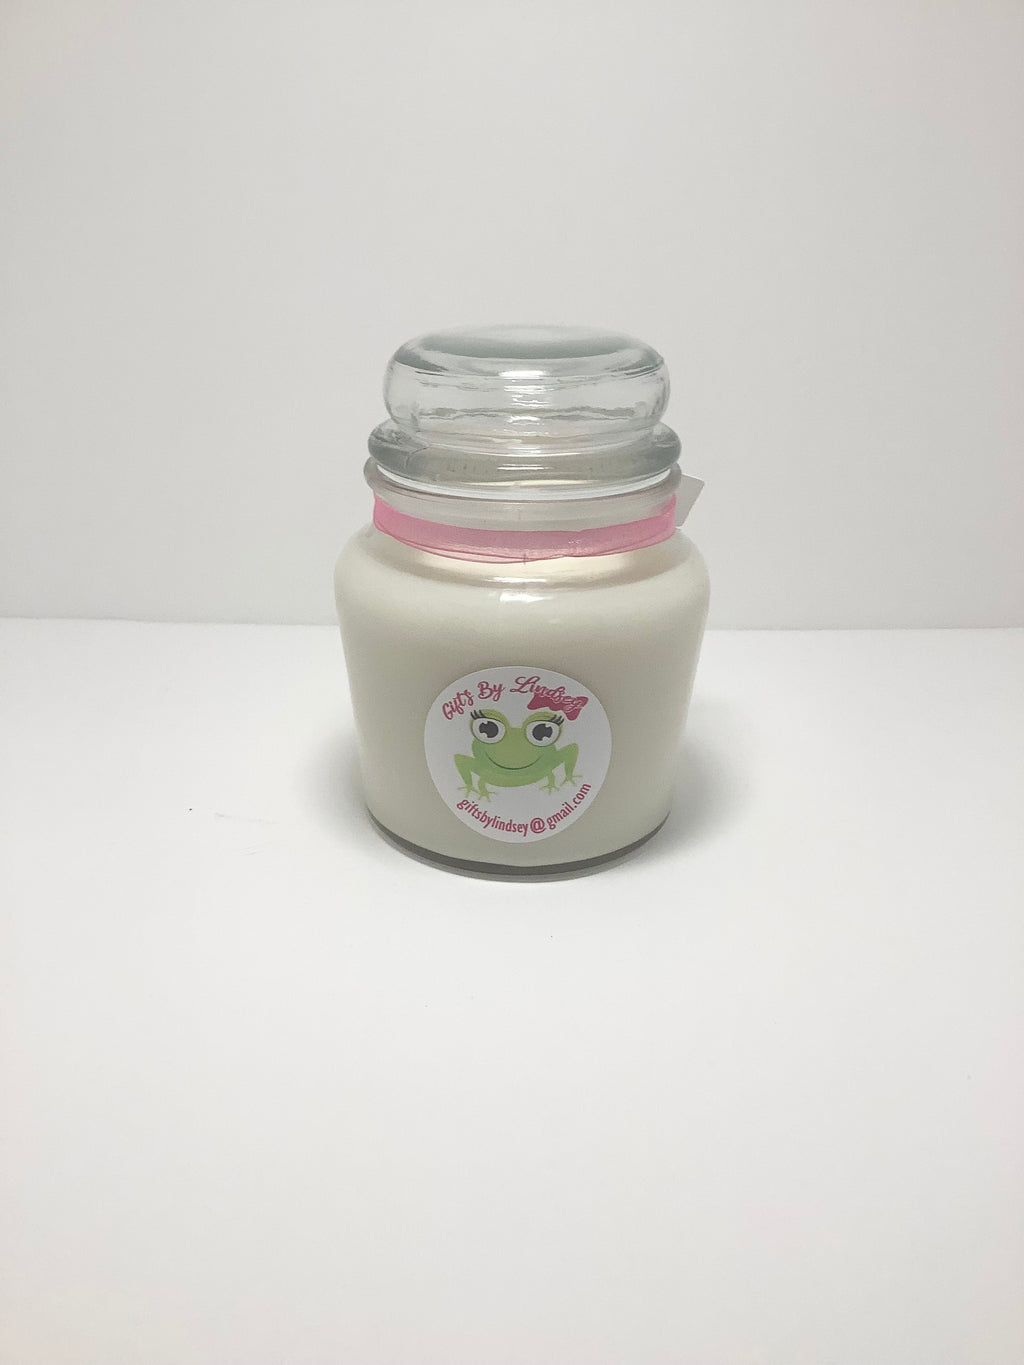 Pink Magnolia Blossom soy candle